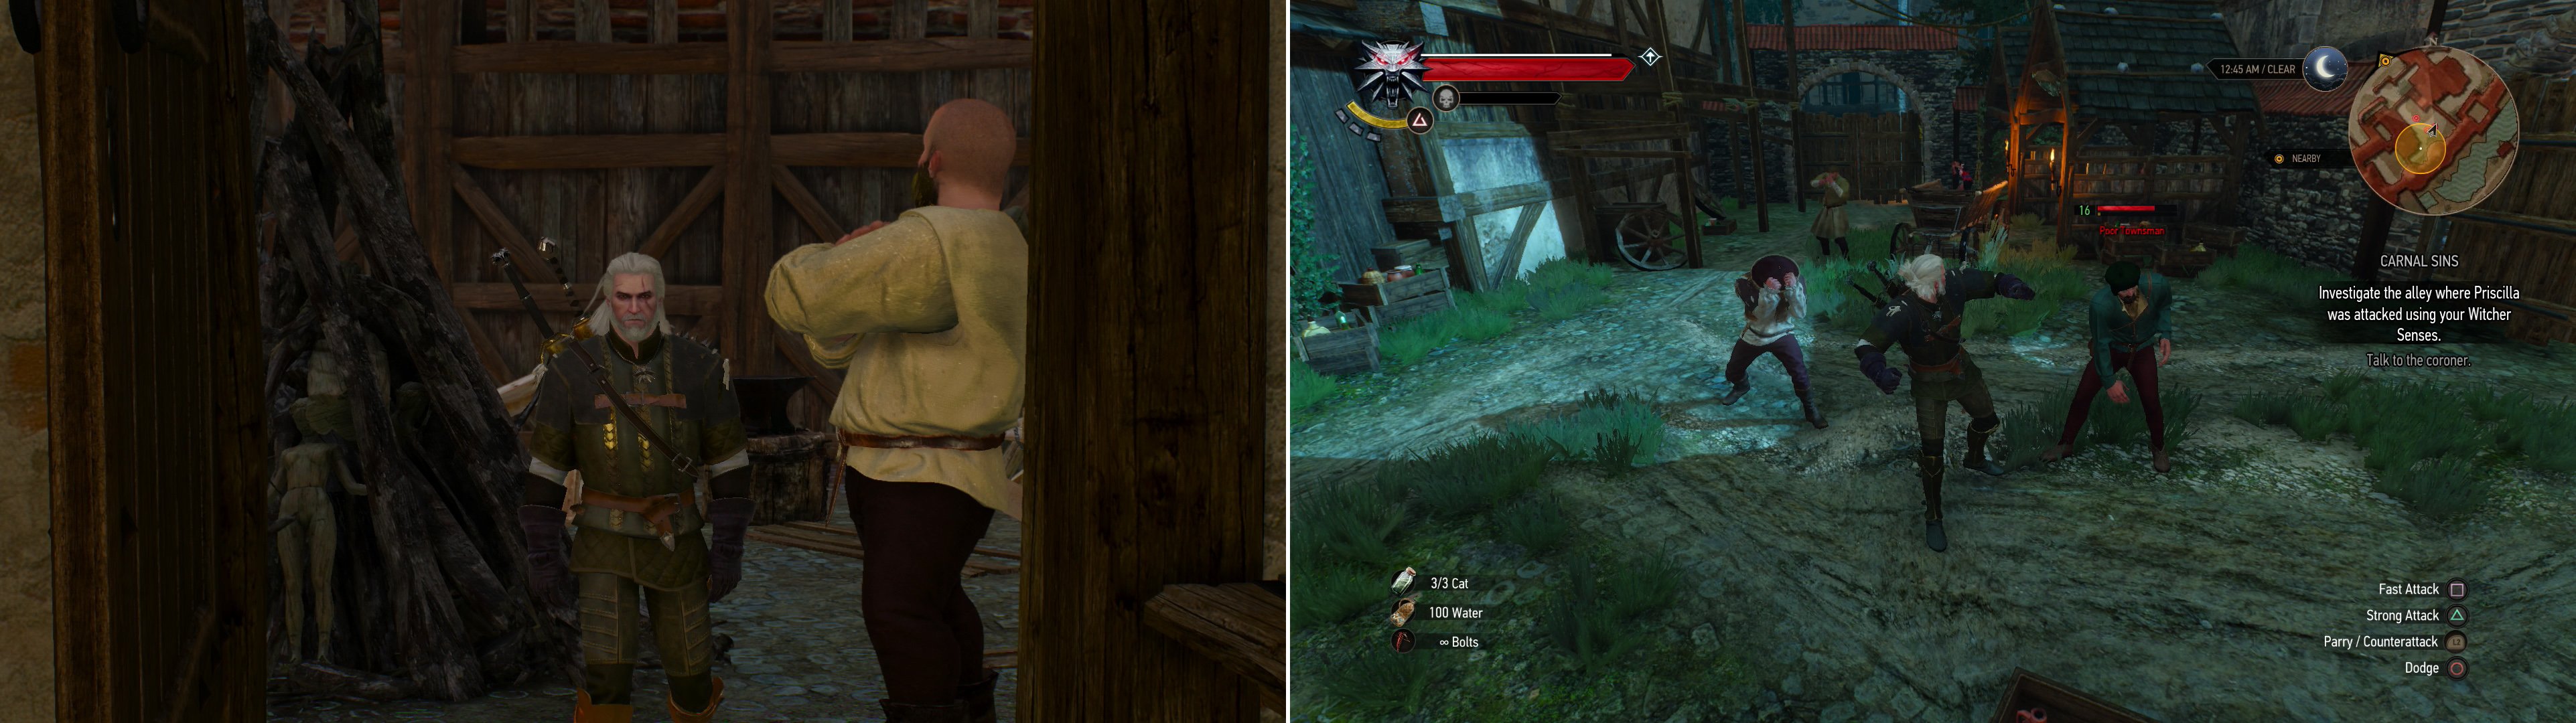 Investigate the site of the woodcutter's murder (left) then fight off some concerned, but misguided, citizens at the site of Priscilla's attack (right).